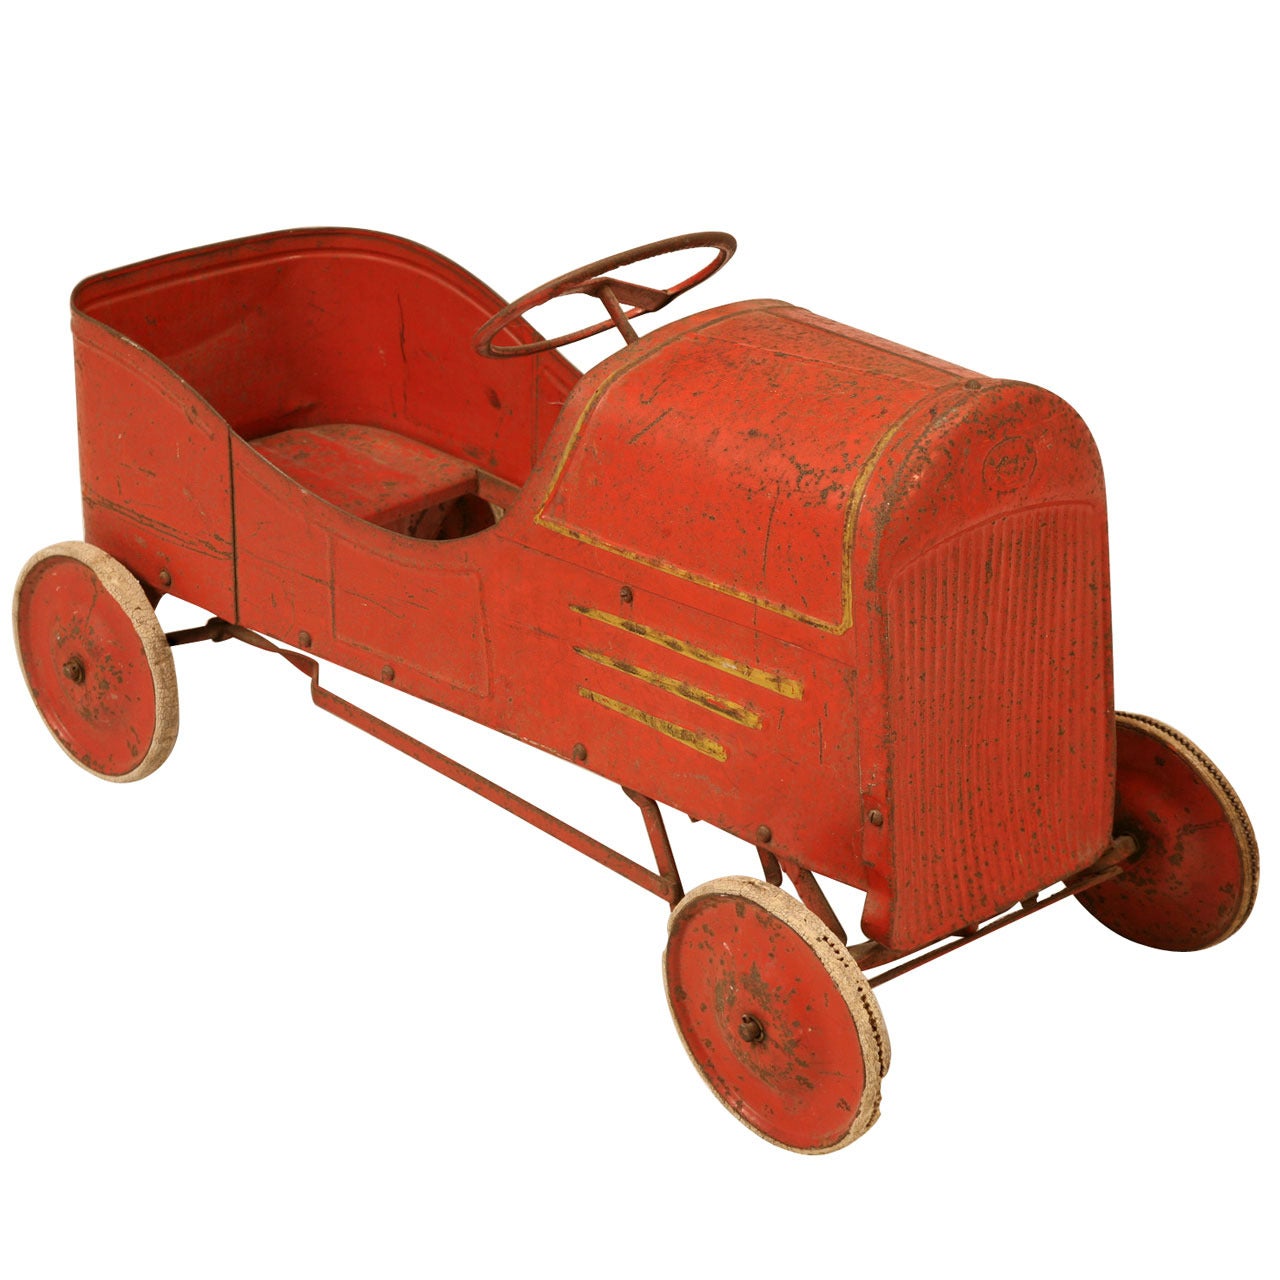 Sold at Auction: A 1930s-style pedal car for the 1983 stage